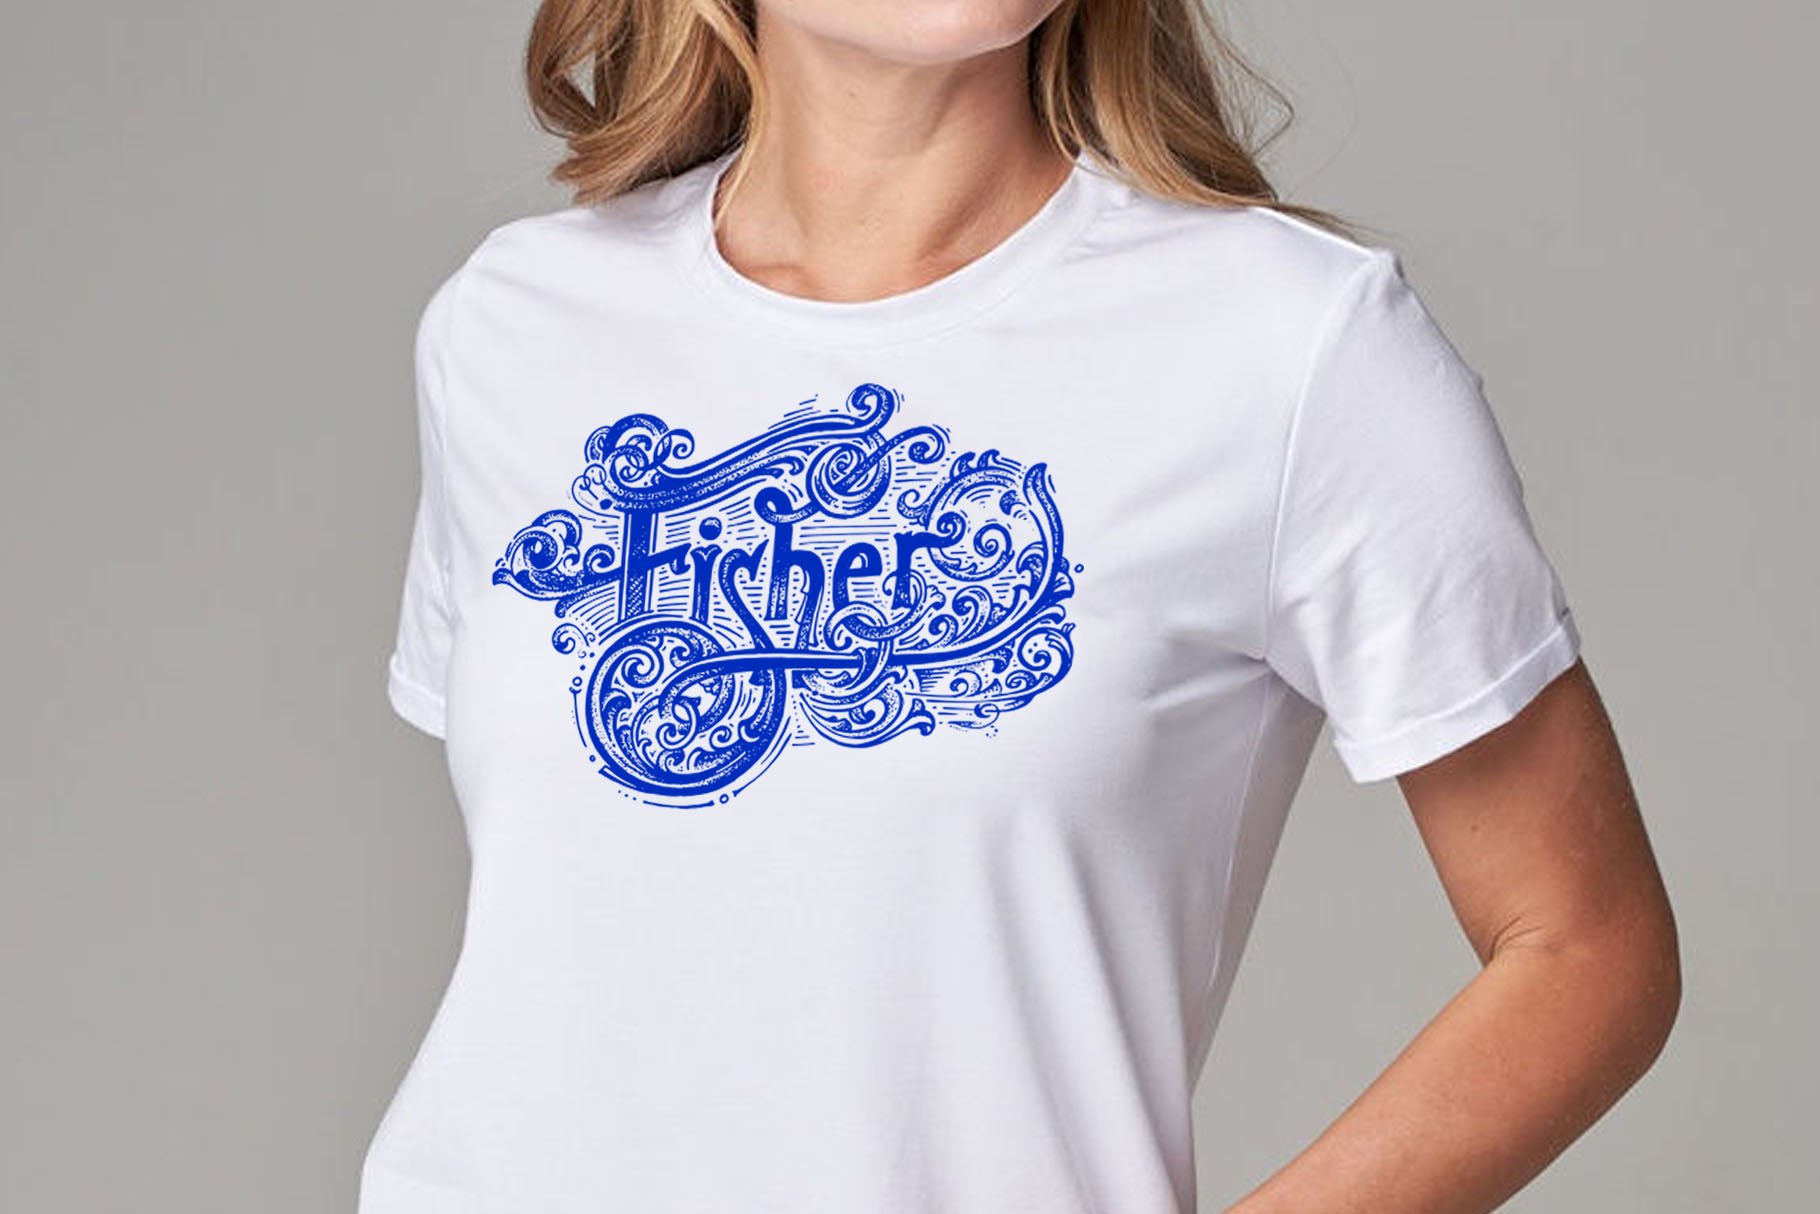 Classic white t-shirt with blue fisher illustration.